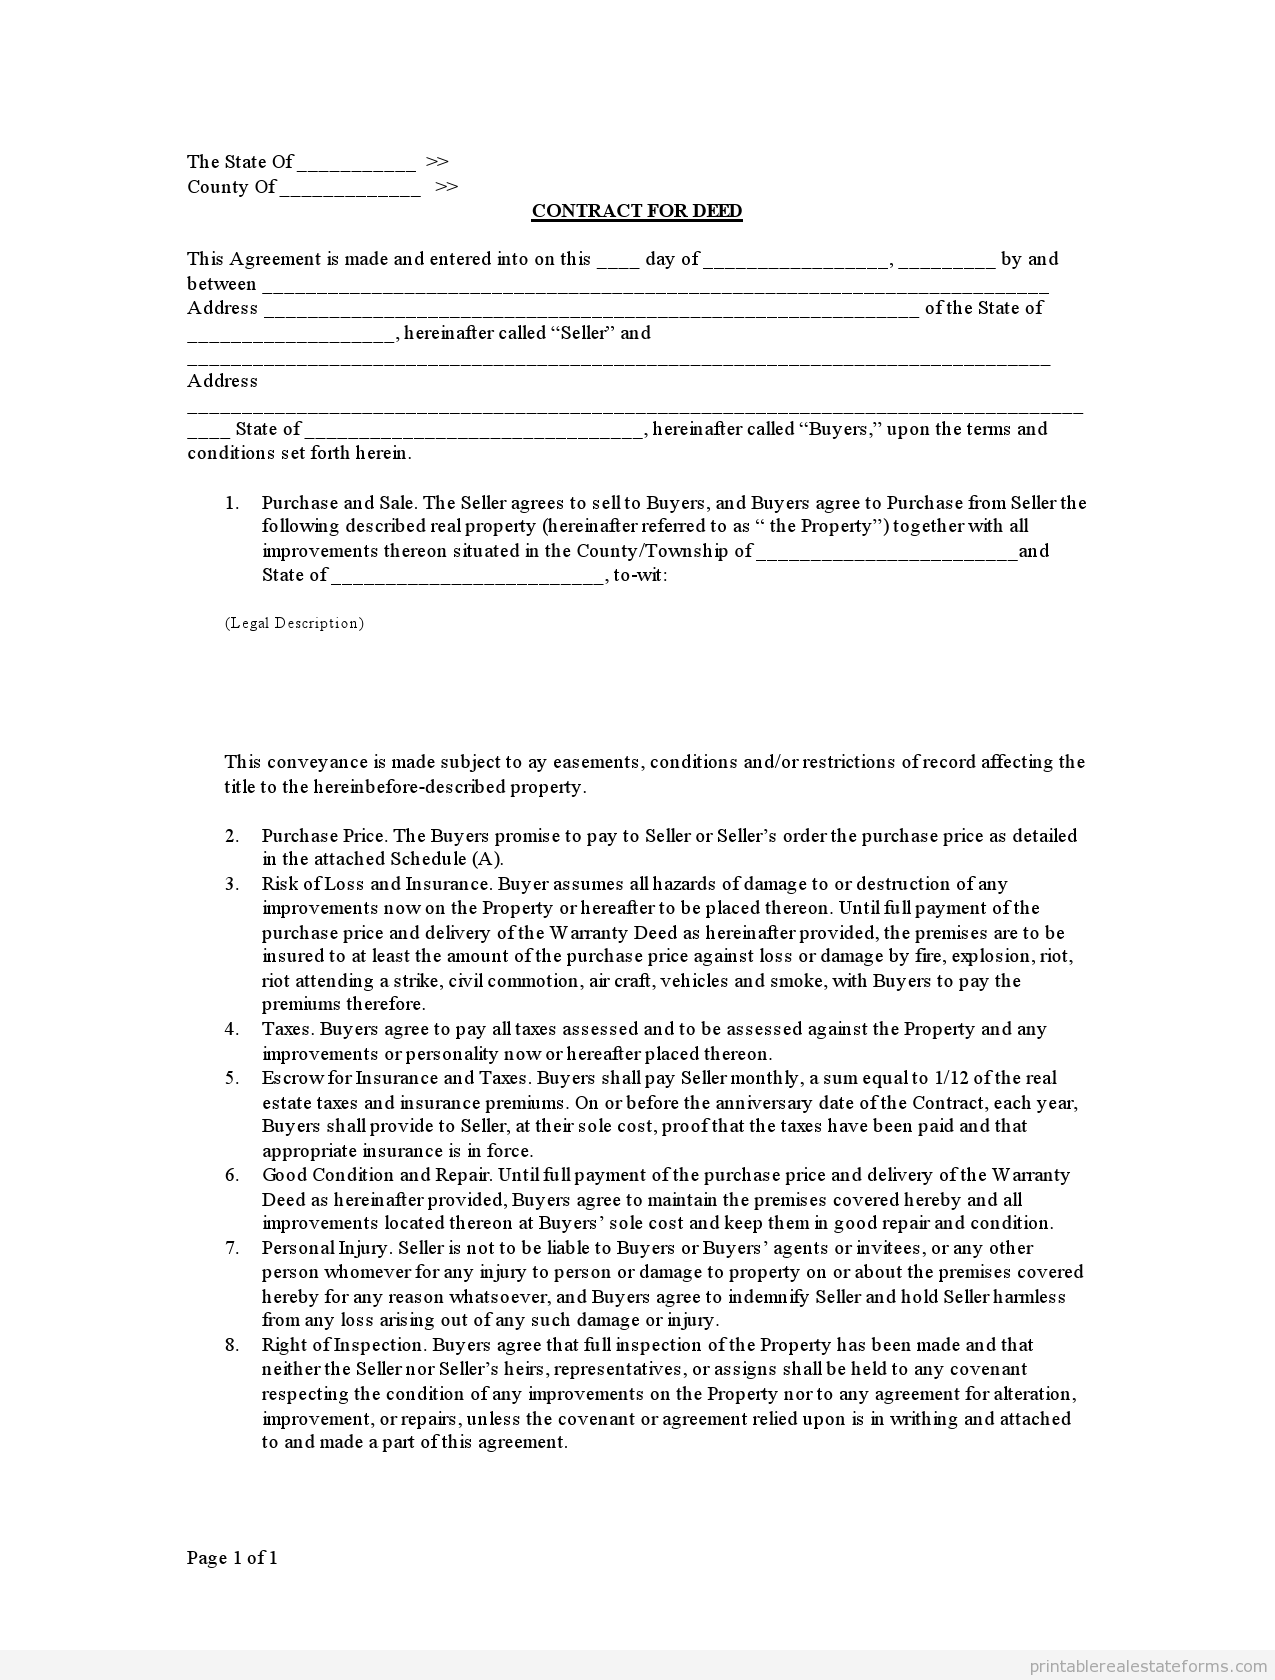 Free Printable Contract For Deed Form BASIC TEMPLATES 